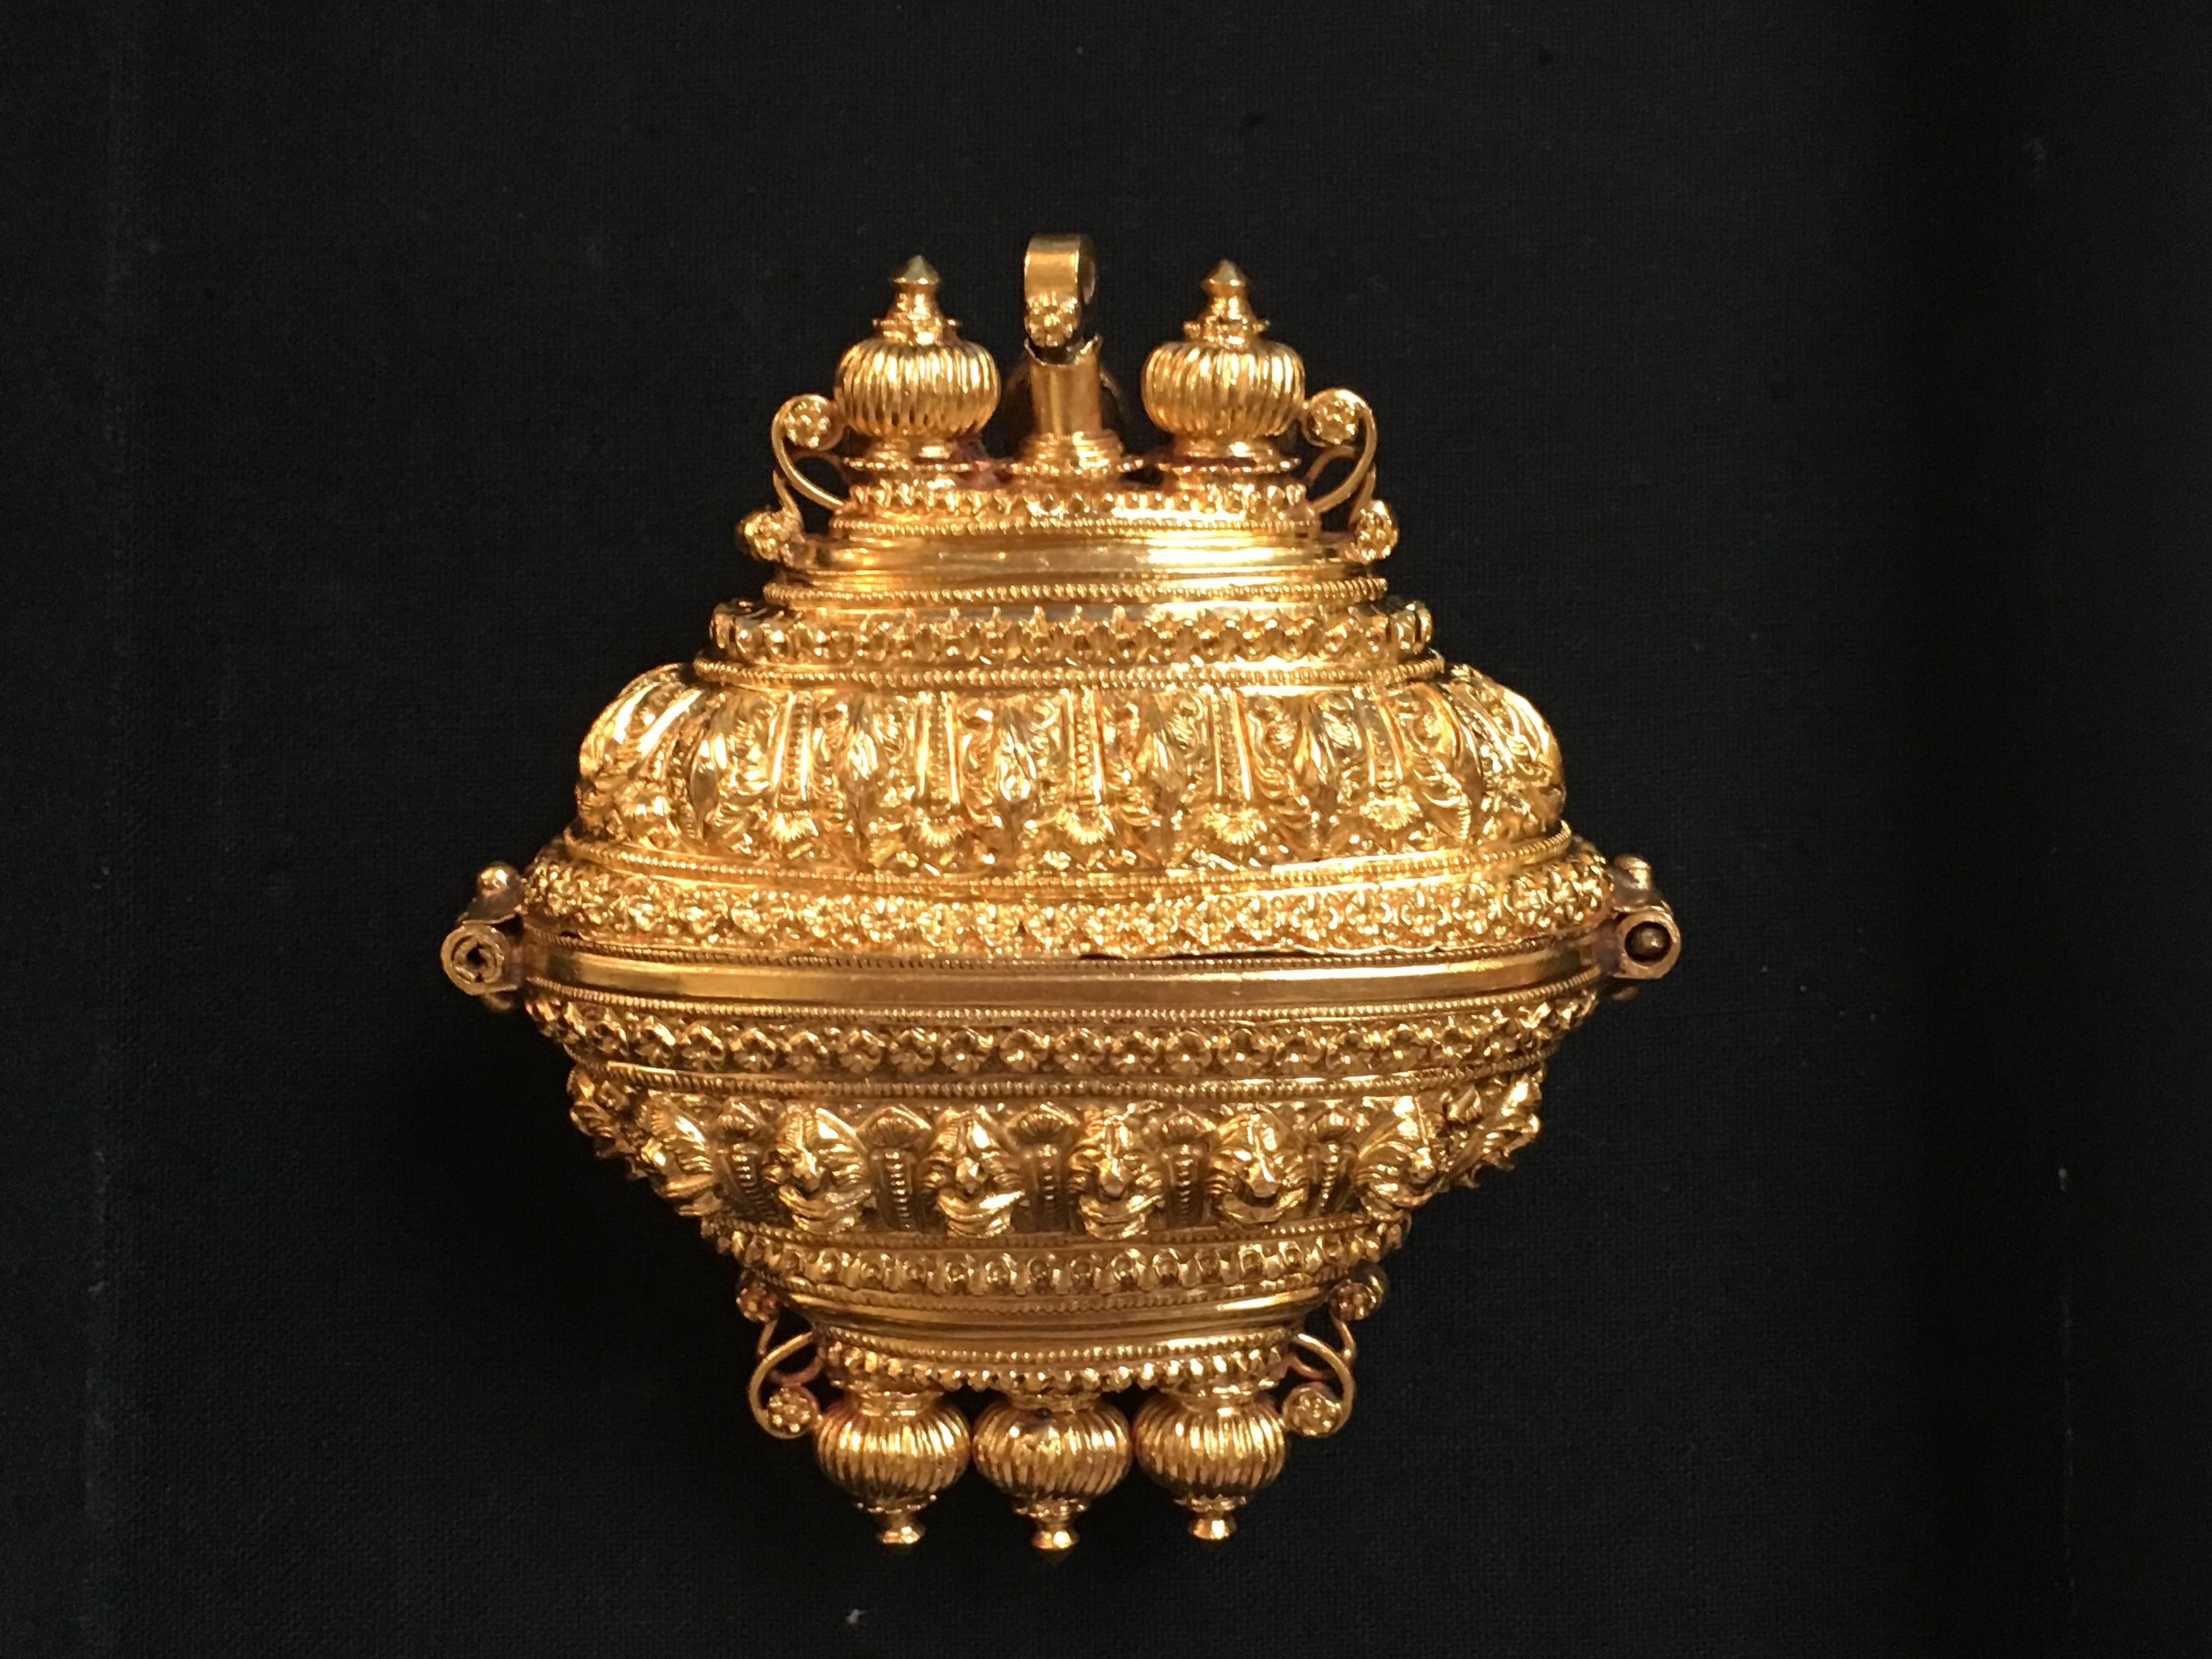 A stunning Indian lingam amulet box from a gowrisankara necklace, Tamil Nadu, late 19th century. This amulet box would have been worn on a necklace of rudraksha beads, and used by a Shaivite priest during holy festivals. A small holy lingam, or holy